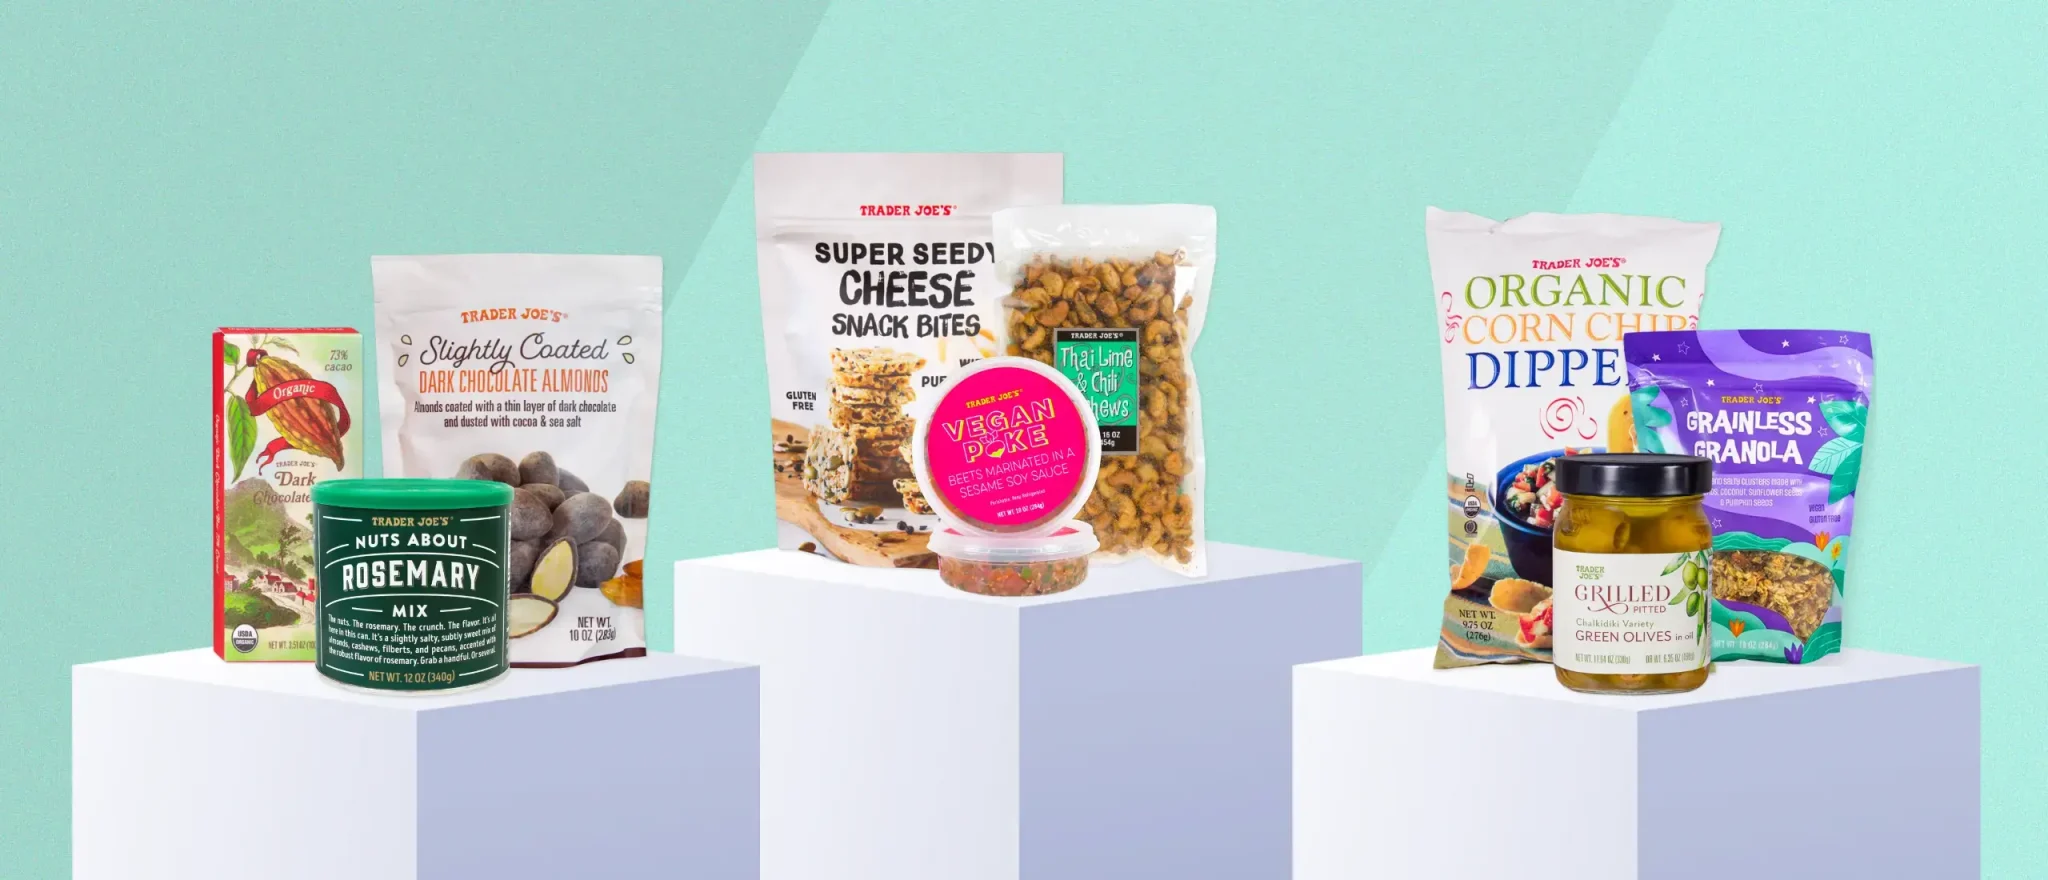 25 Trader Joe’s Healthy Snacks a Registered Dietitian Can’t Live Without